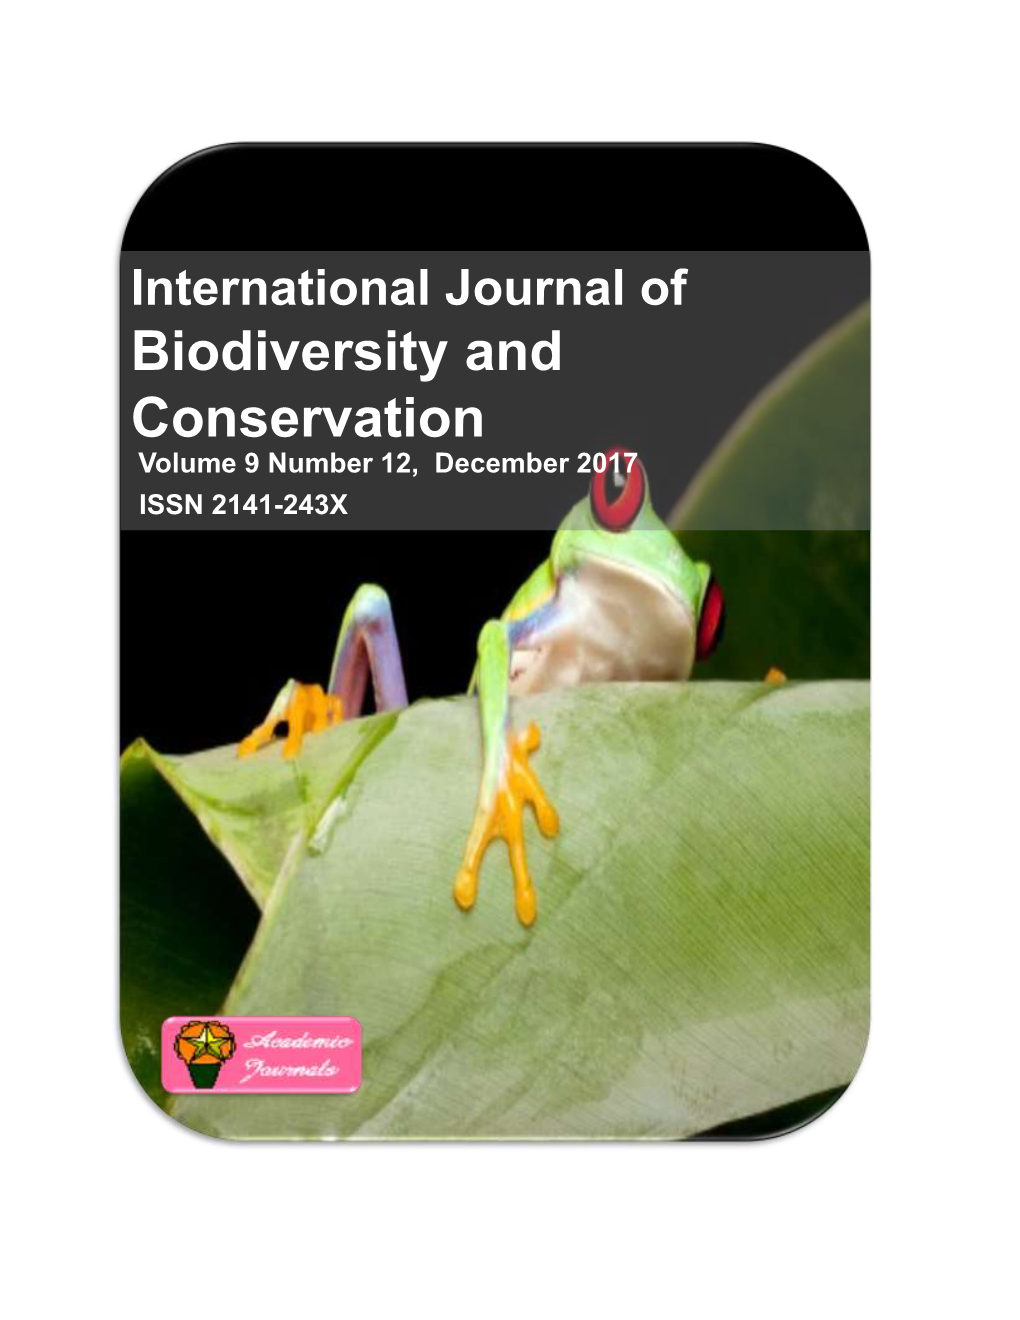 Biodiversity and Conservation Volume 9 Number 12, December 2017 ISSN 2141-243X